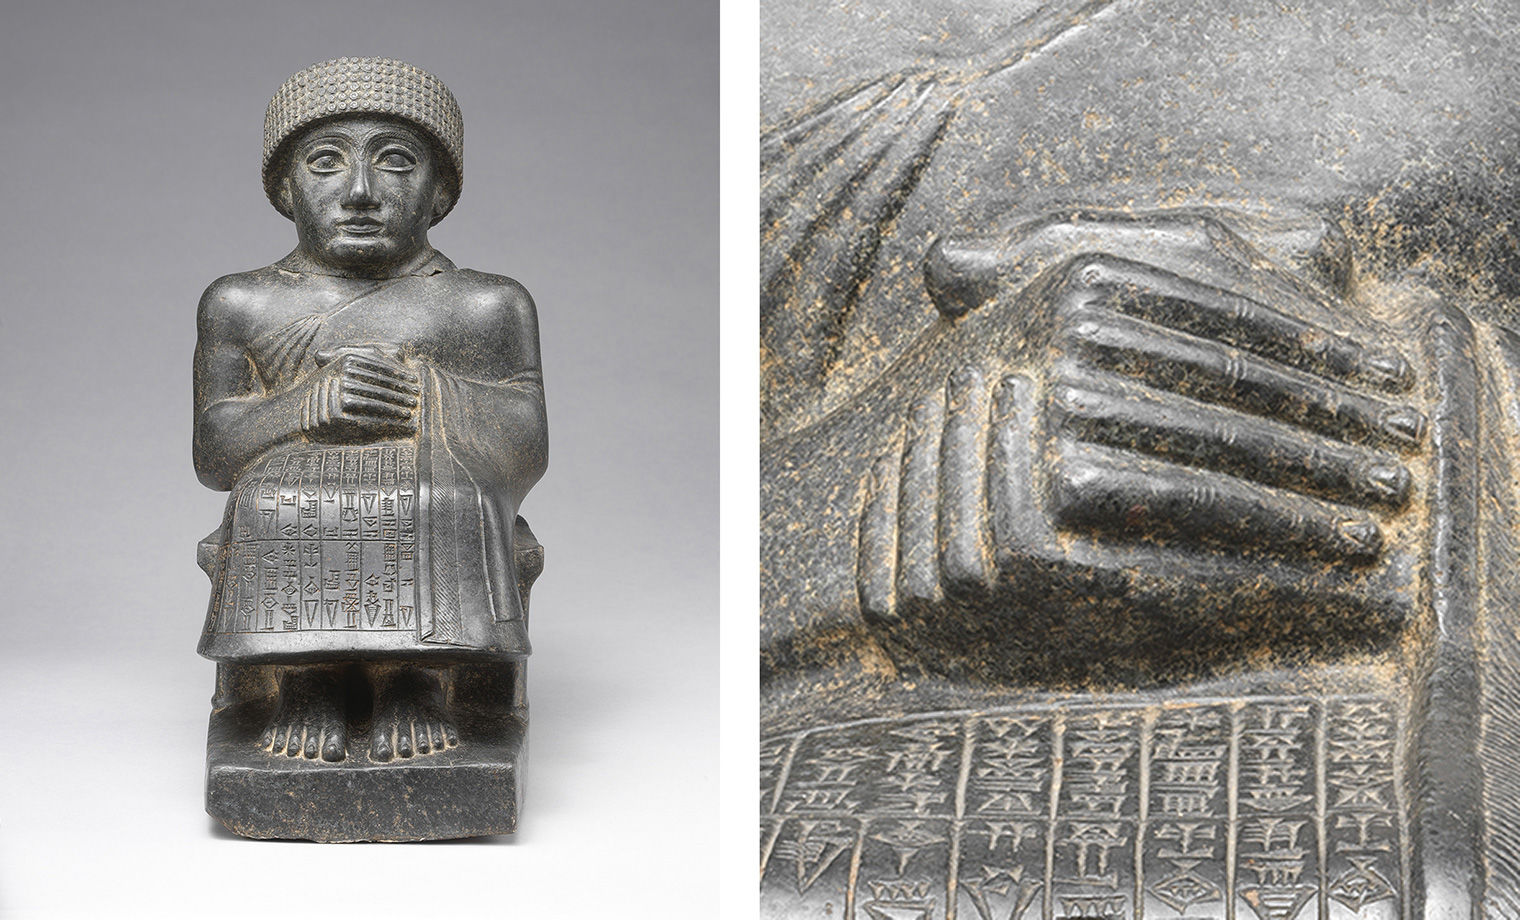 At left, statue of Gudea in dark diorite stone. Gudea is seated with hands clasped at his lap, wearing a helmet and a robe inscribed with Sumerian. At right, a close up of Gudea's clasped hands.